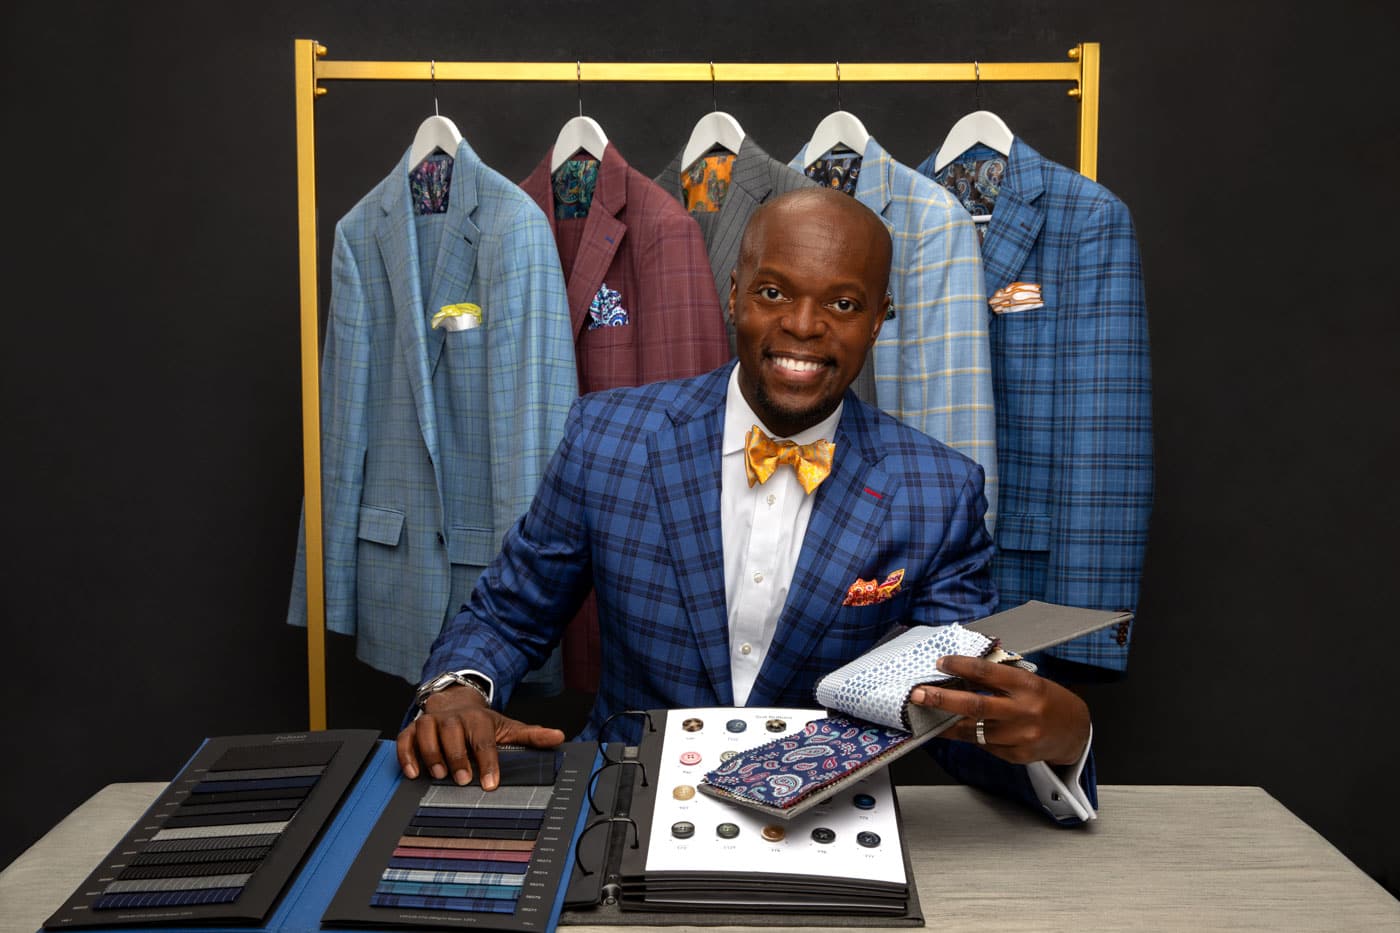 Product photo of a stylish, handsome black man in dark blue suit with paisley bowtie, floral pocket square, and yellow socks. He's sitting at a table, showing you the patterns of his products. A rack of suits hangs behind him. Charles Davis of A Polished Man during personal branding photo session.